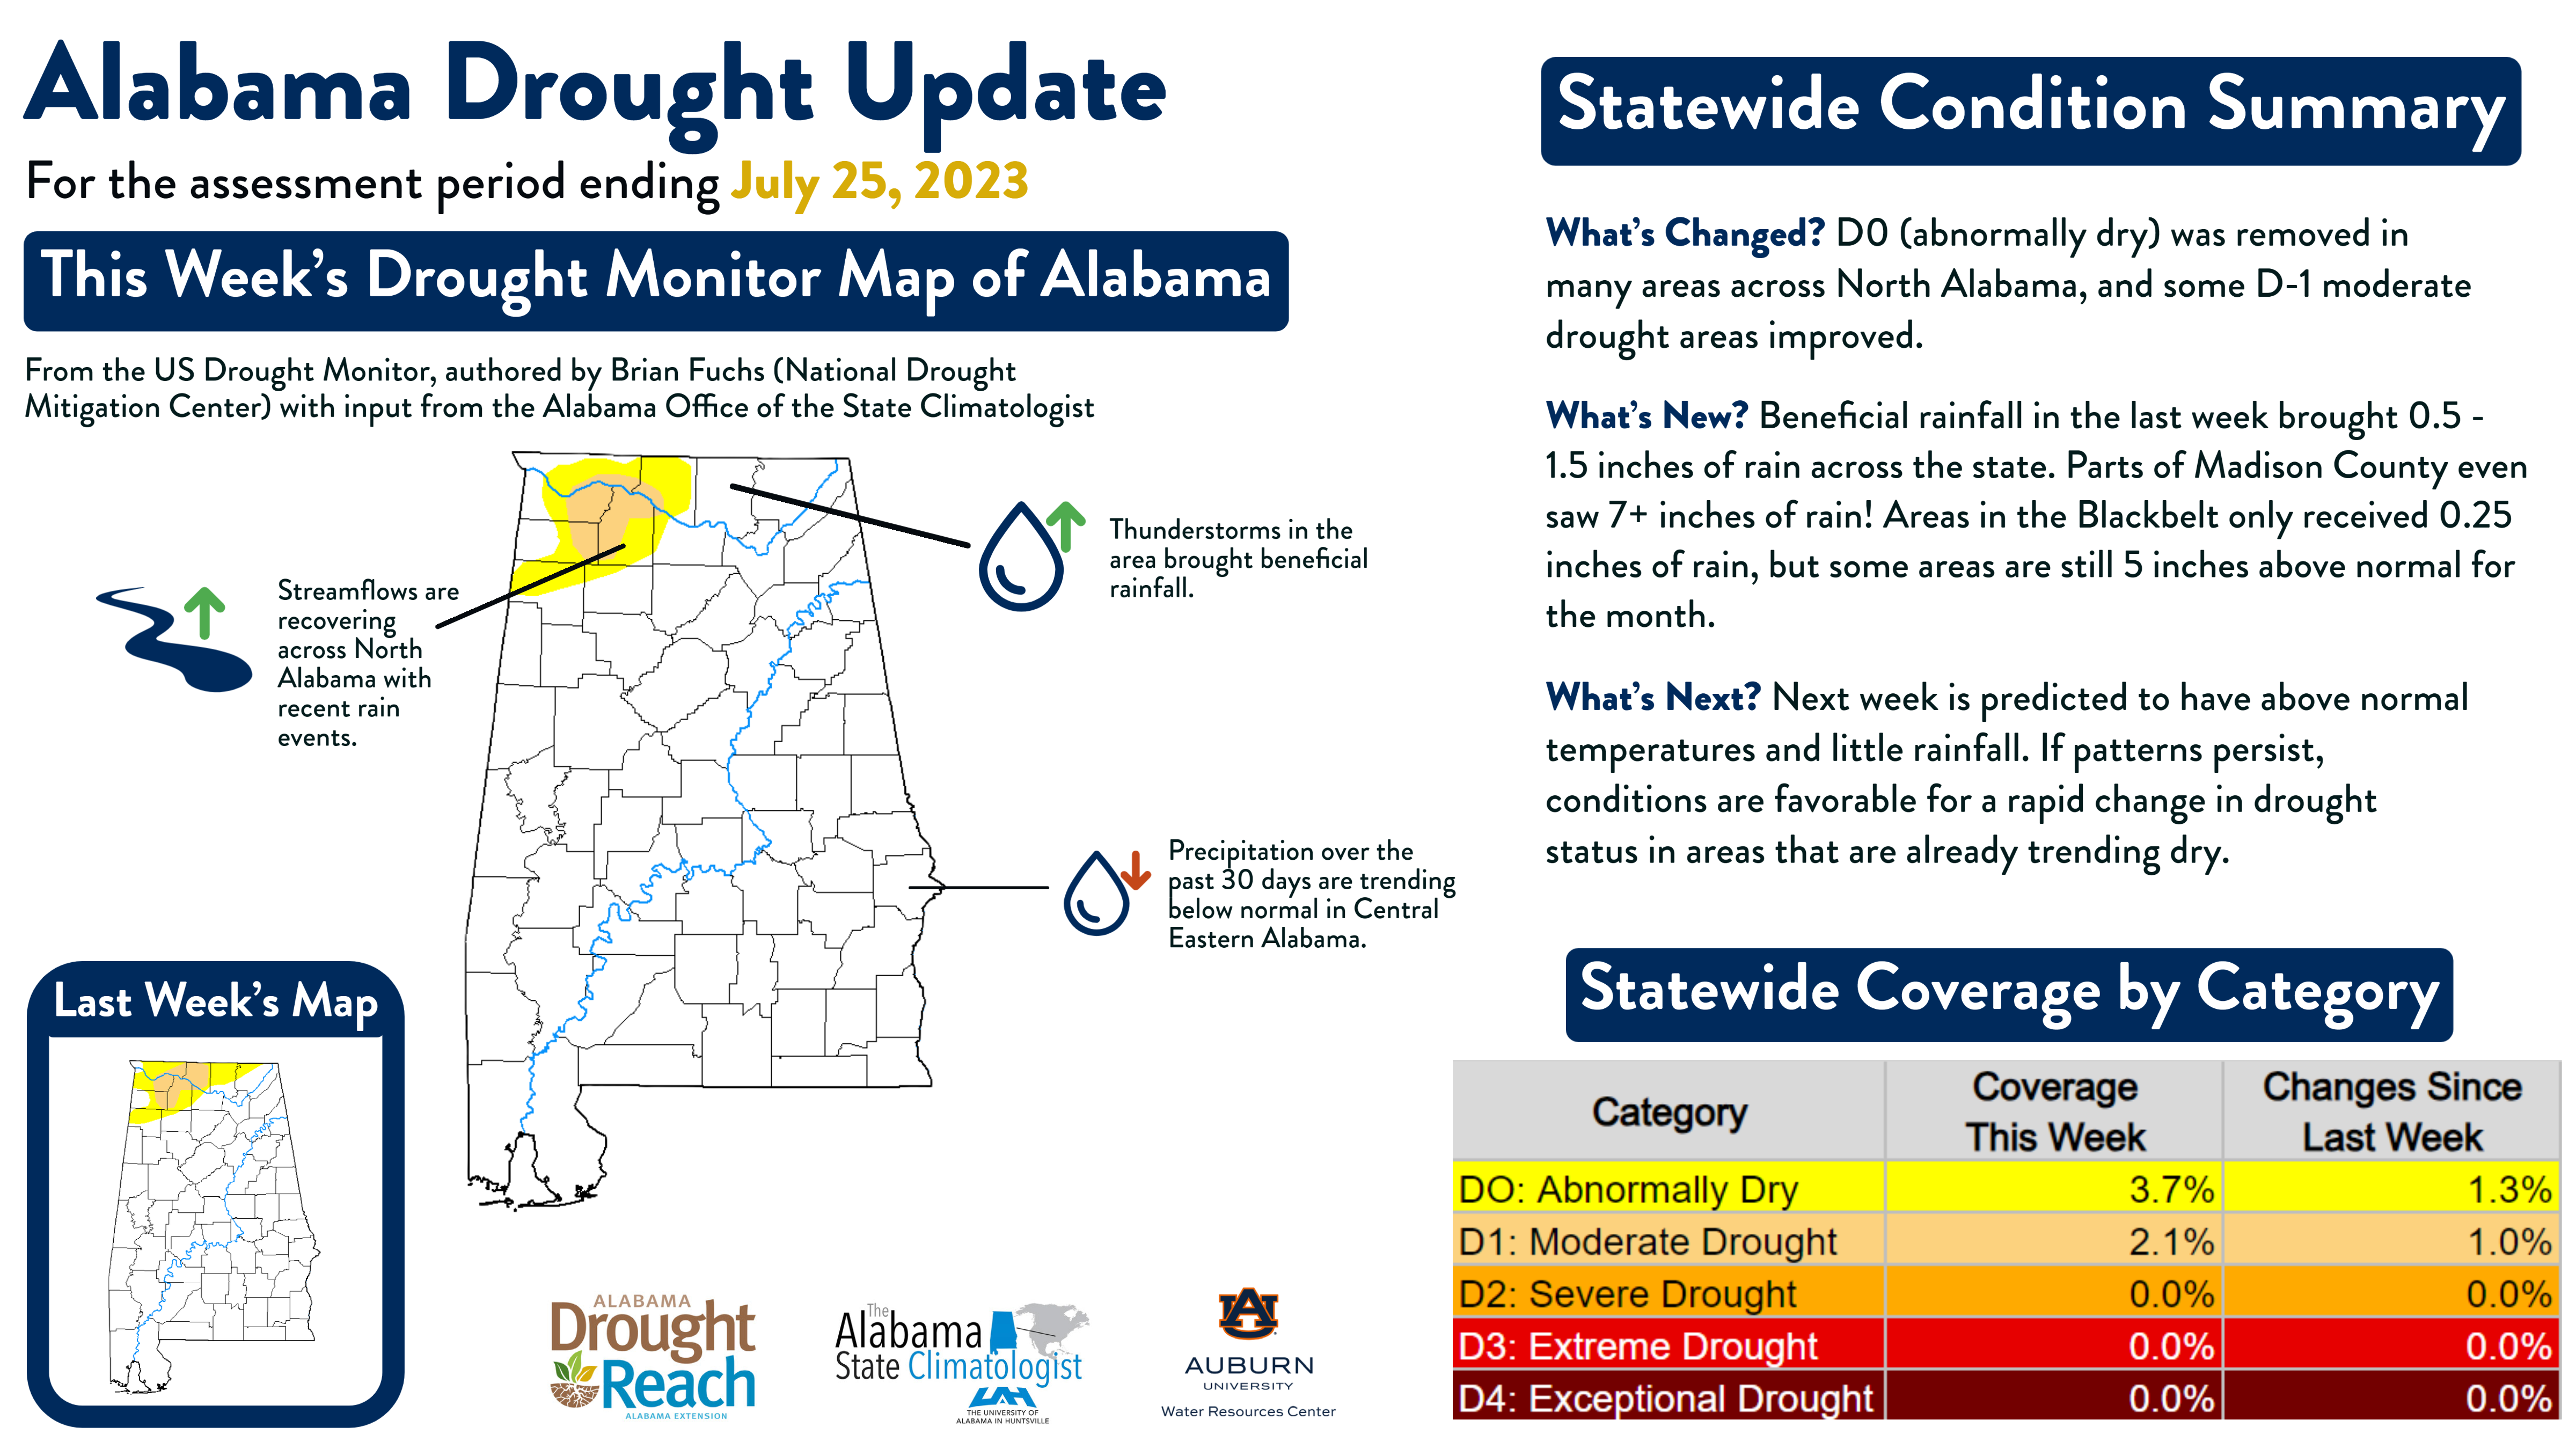 U.S. Drought Monitor Map for Alabama